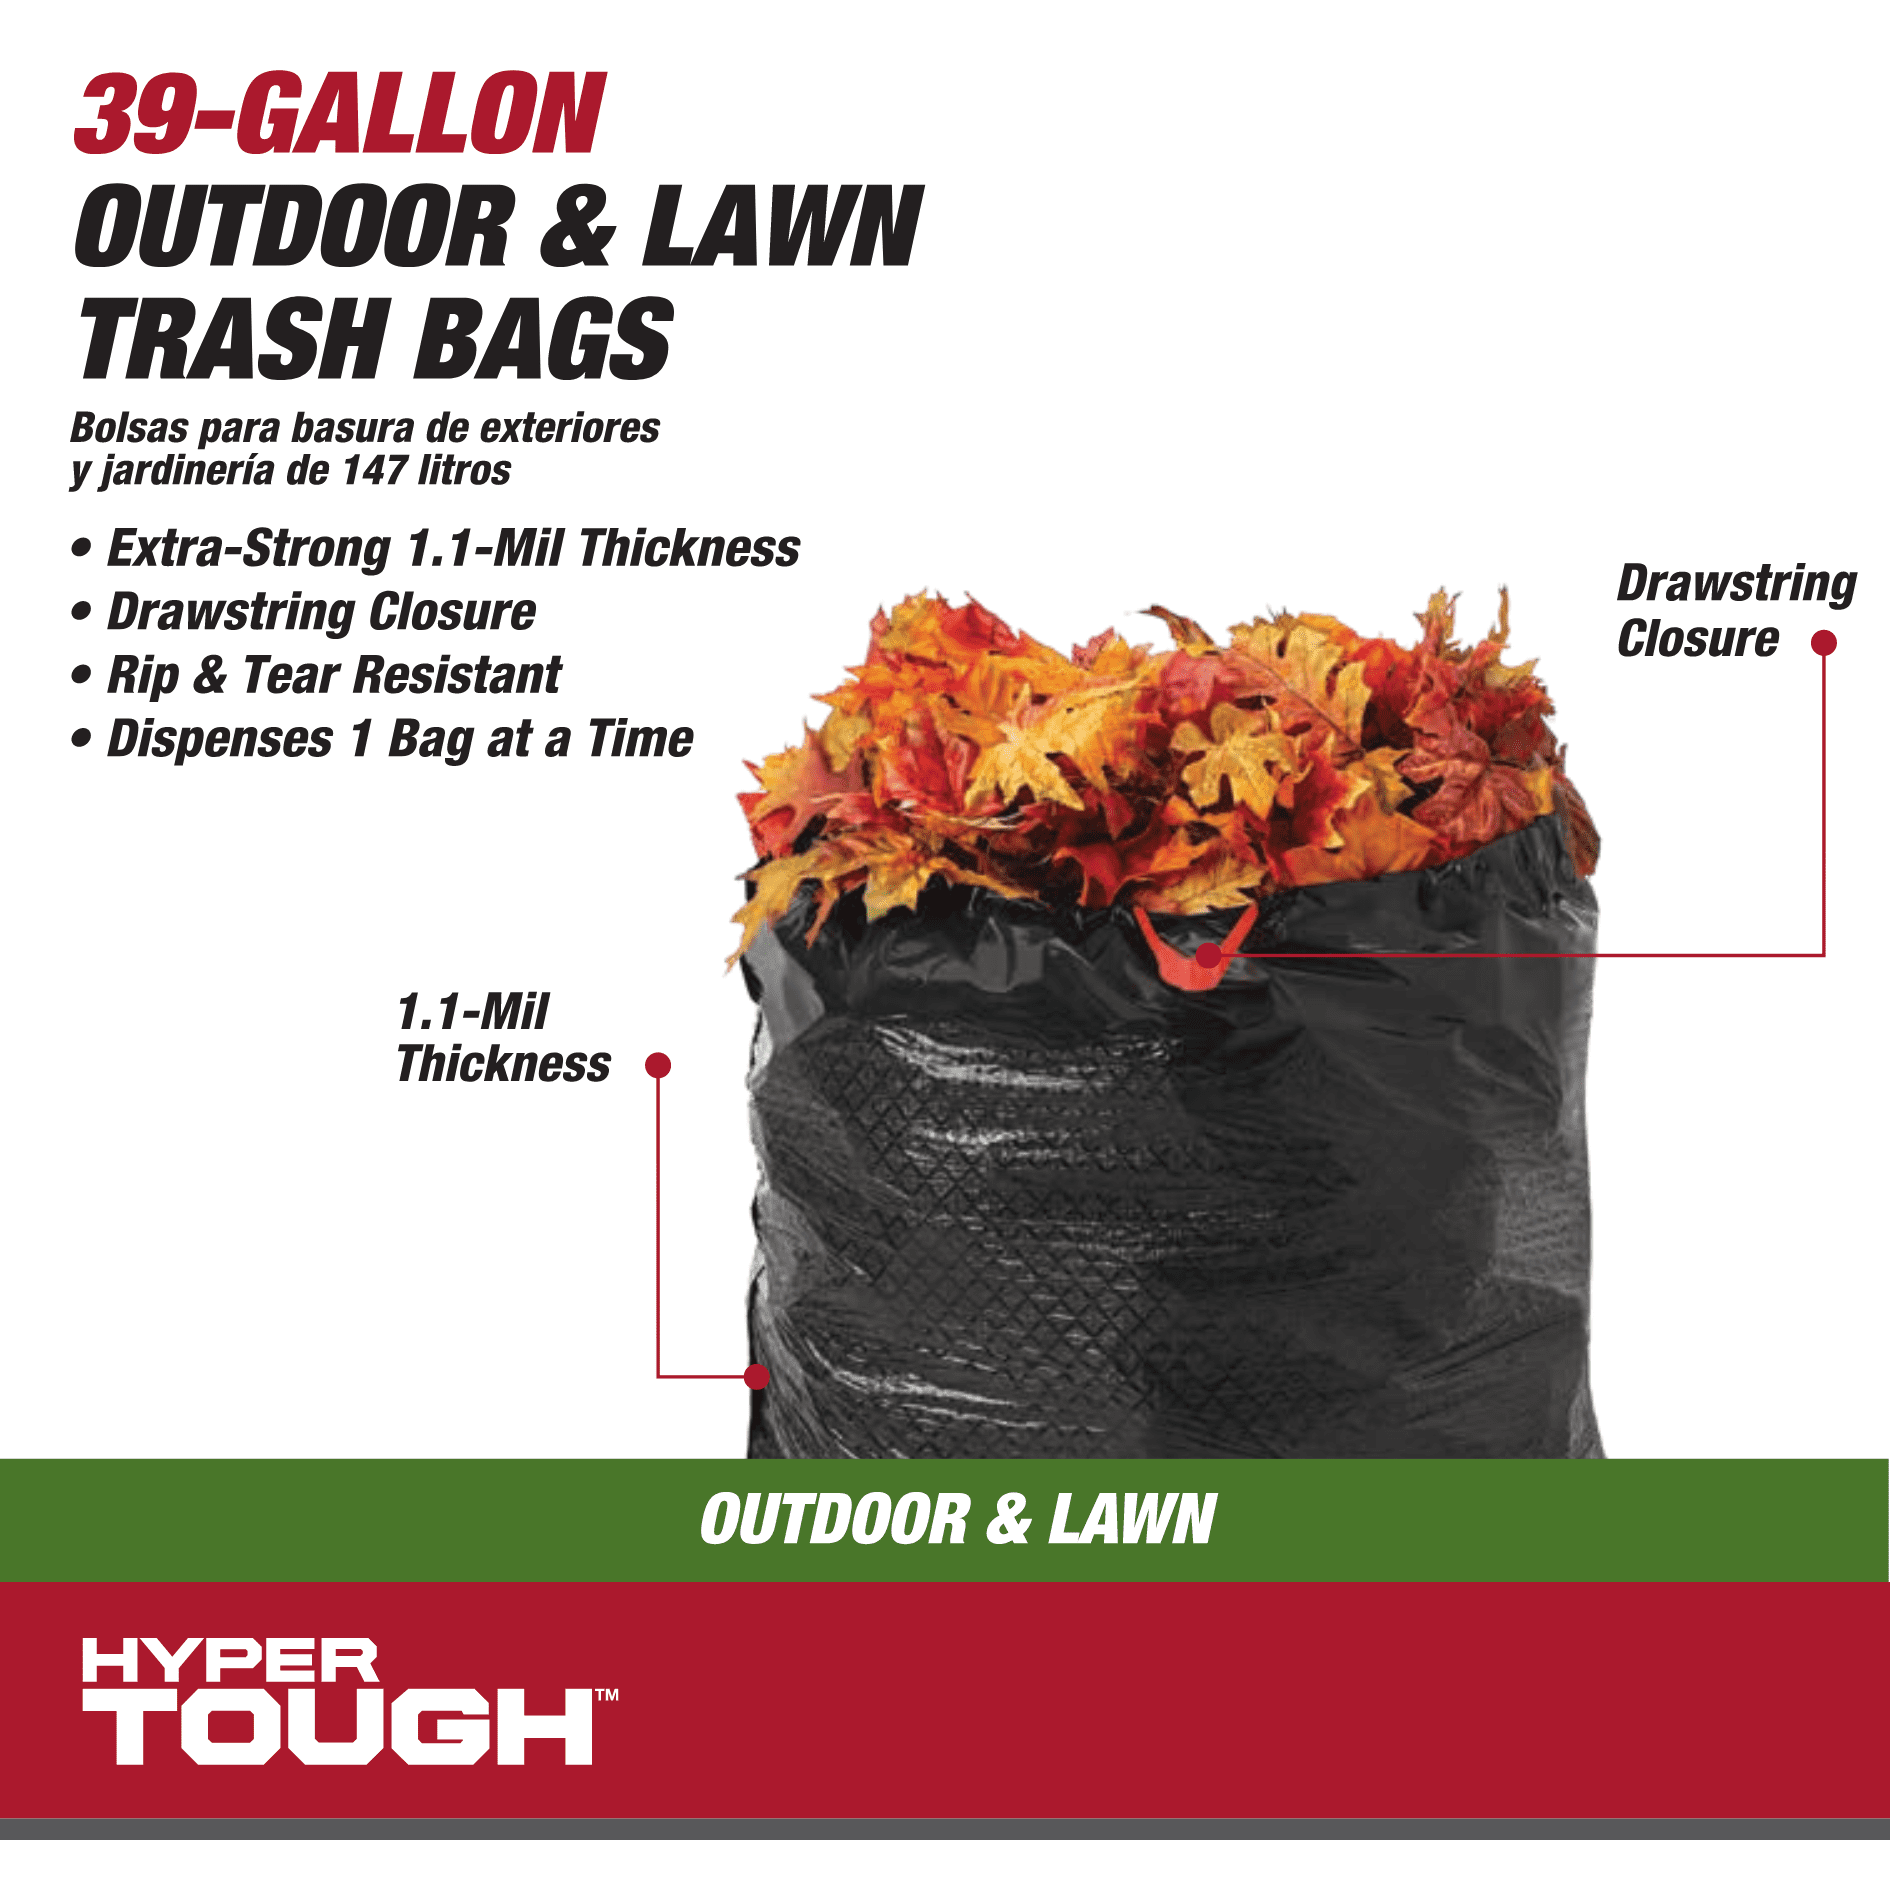 Extra Large vs. Outdoor trash bags. Which would be better for hauling out  modest construction debris and heavyweight loads? : r/Costco